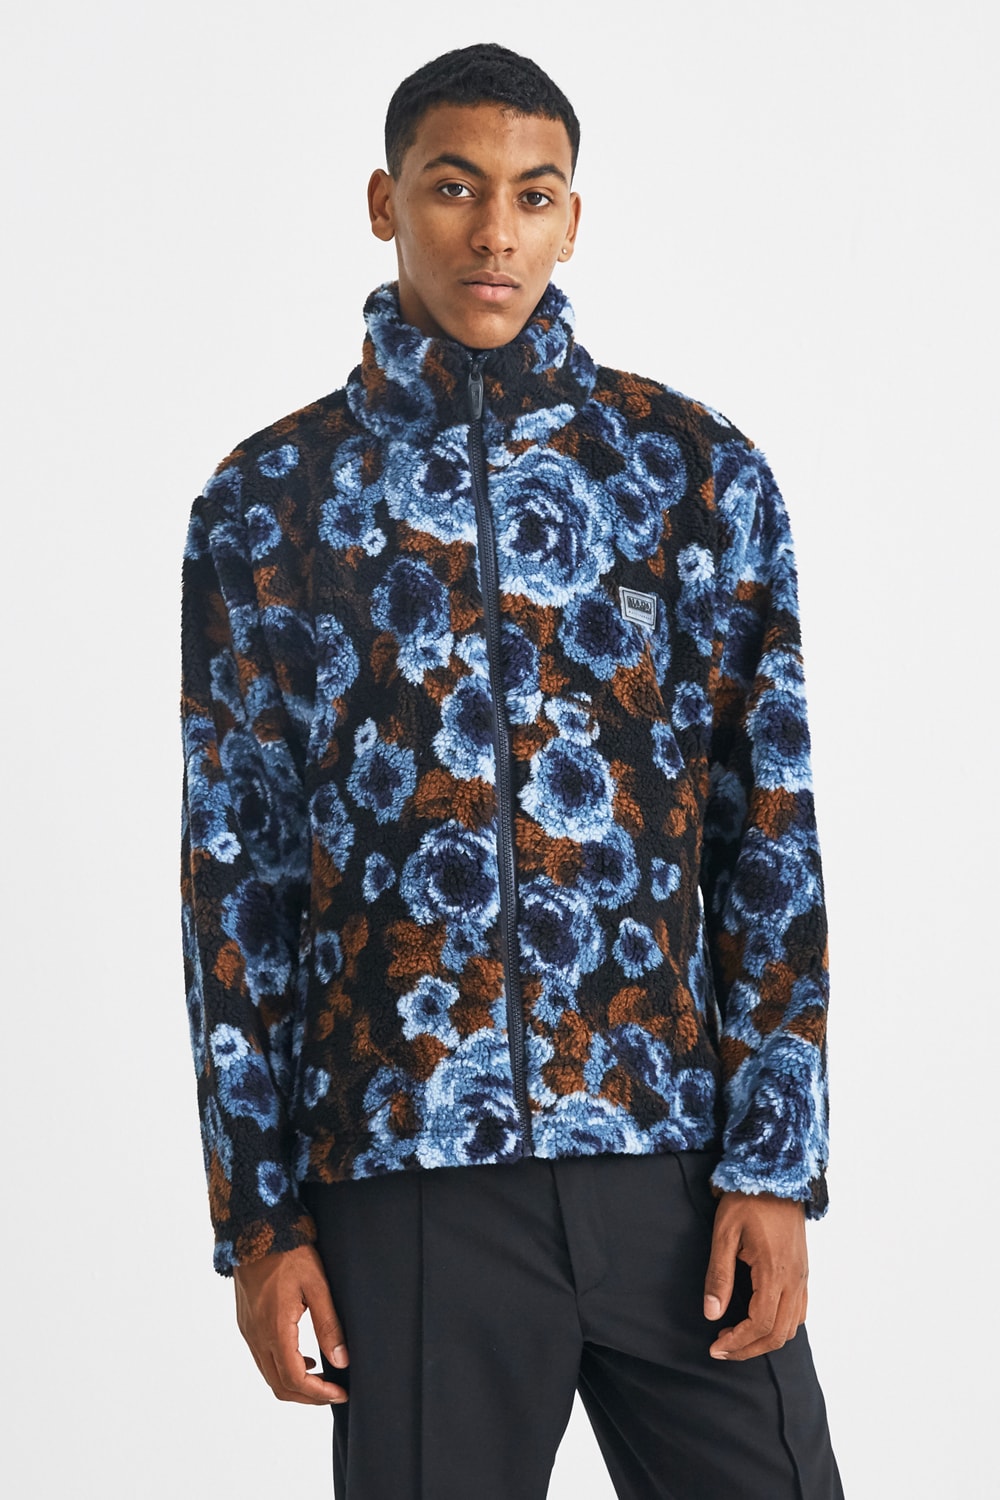 Napa by Martine Rose T-Emin Jacquard Jacket fall winter 2018 blue brown release info